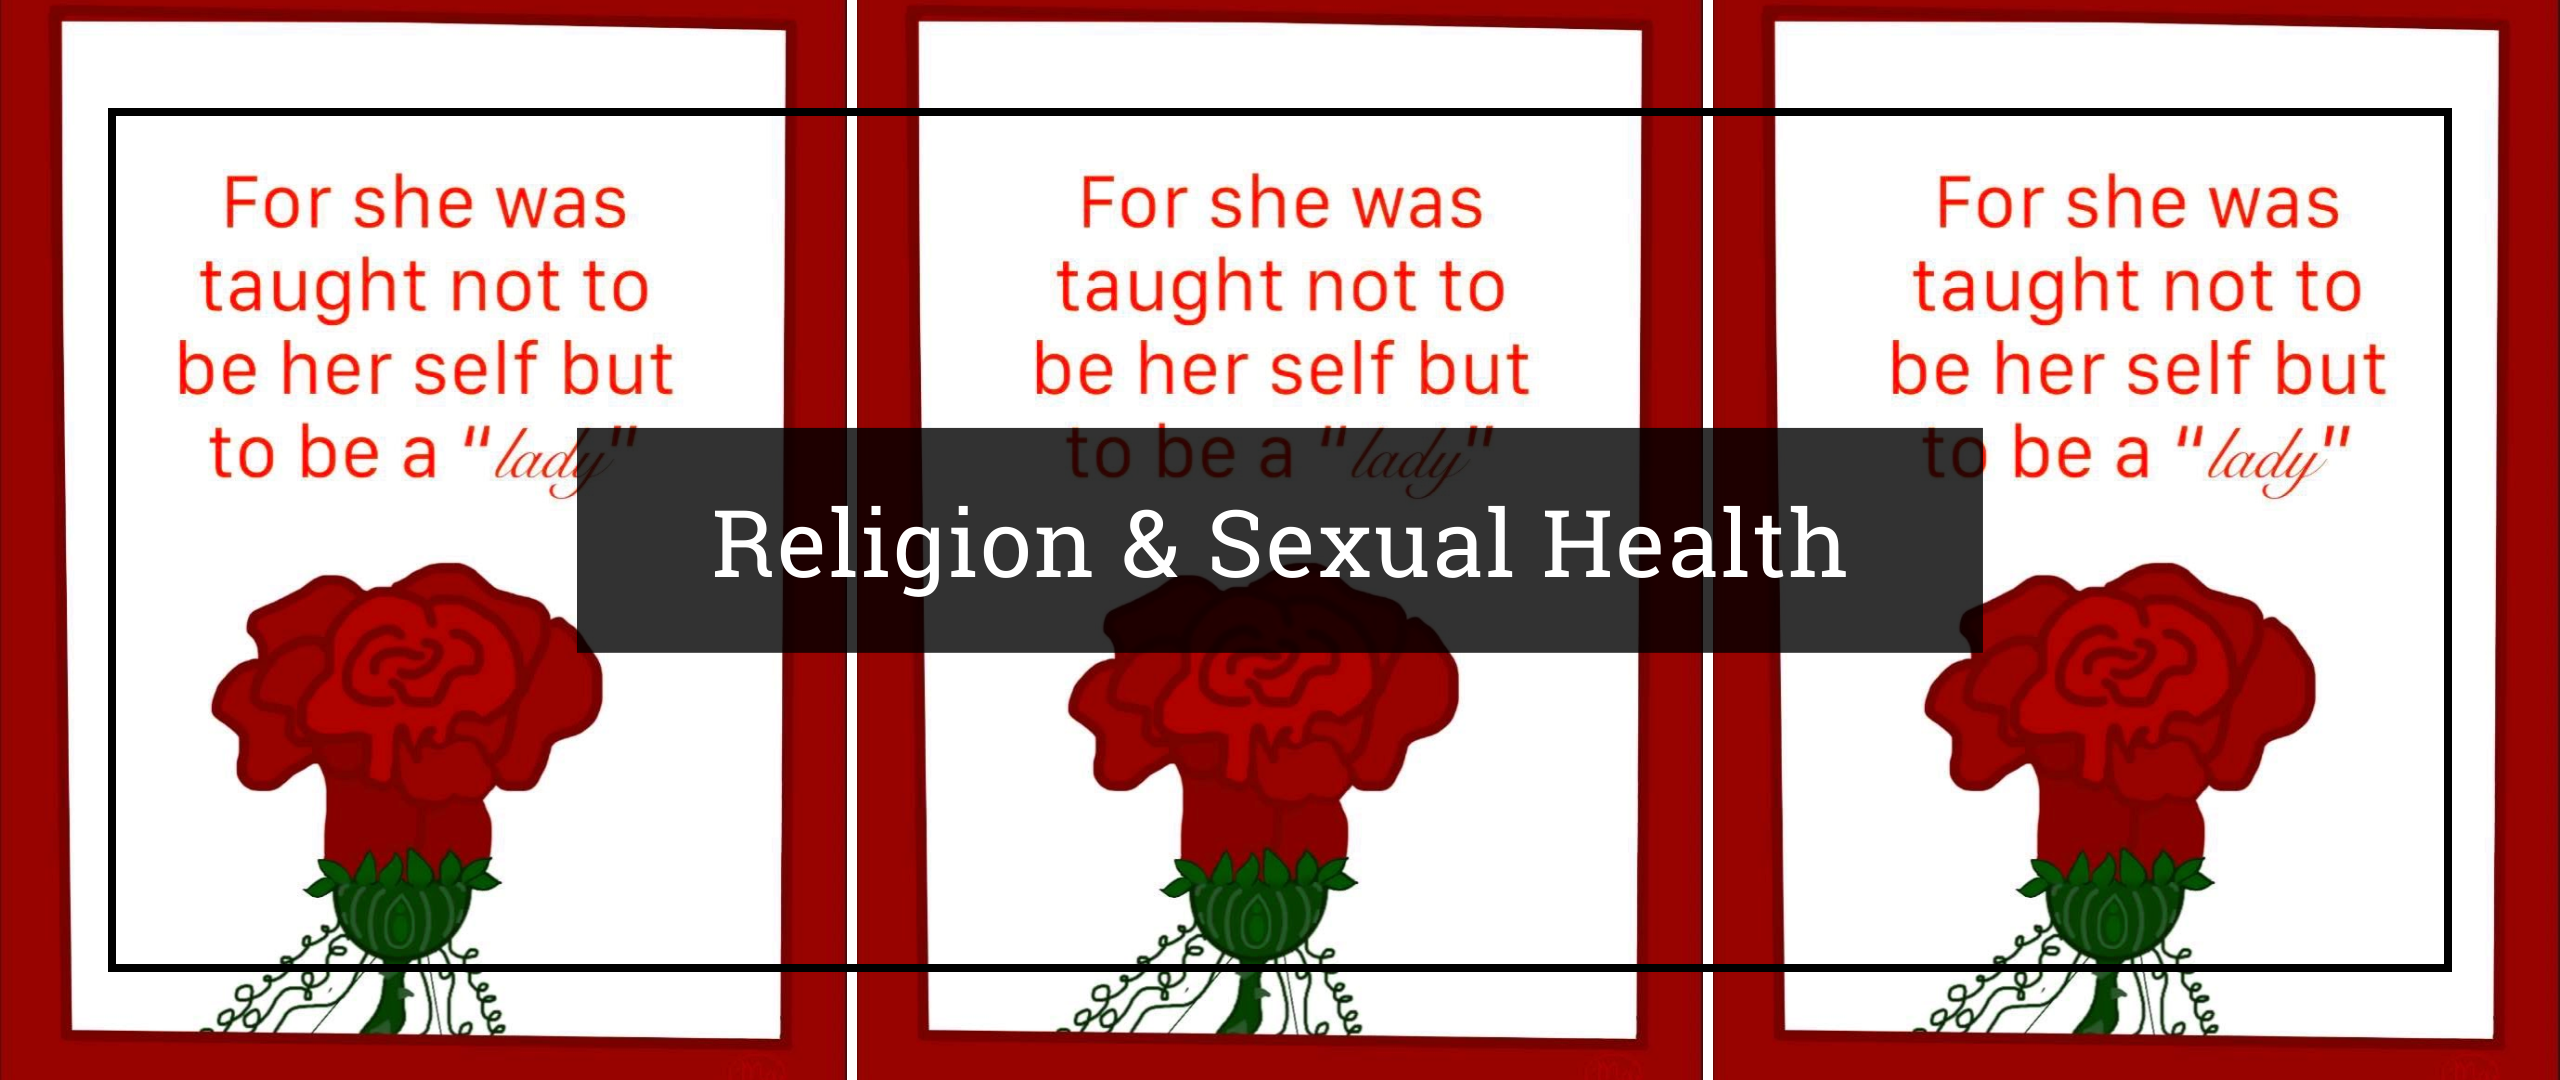 Religion and Sexual Health